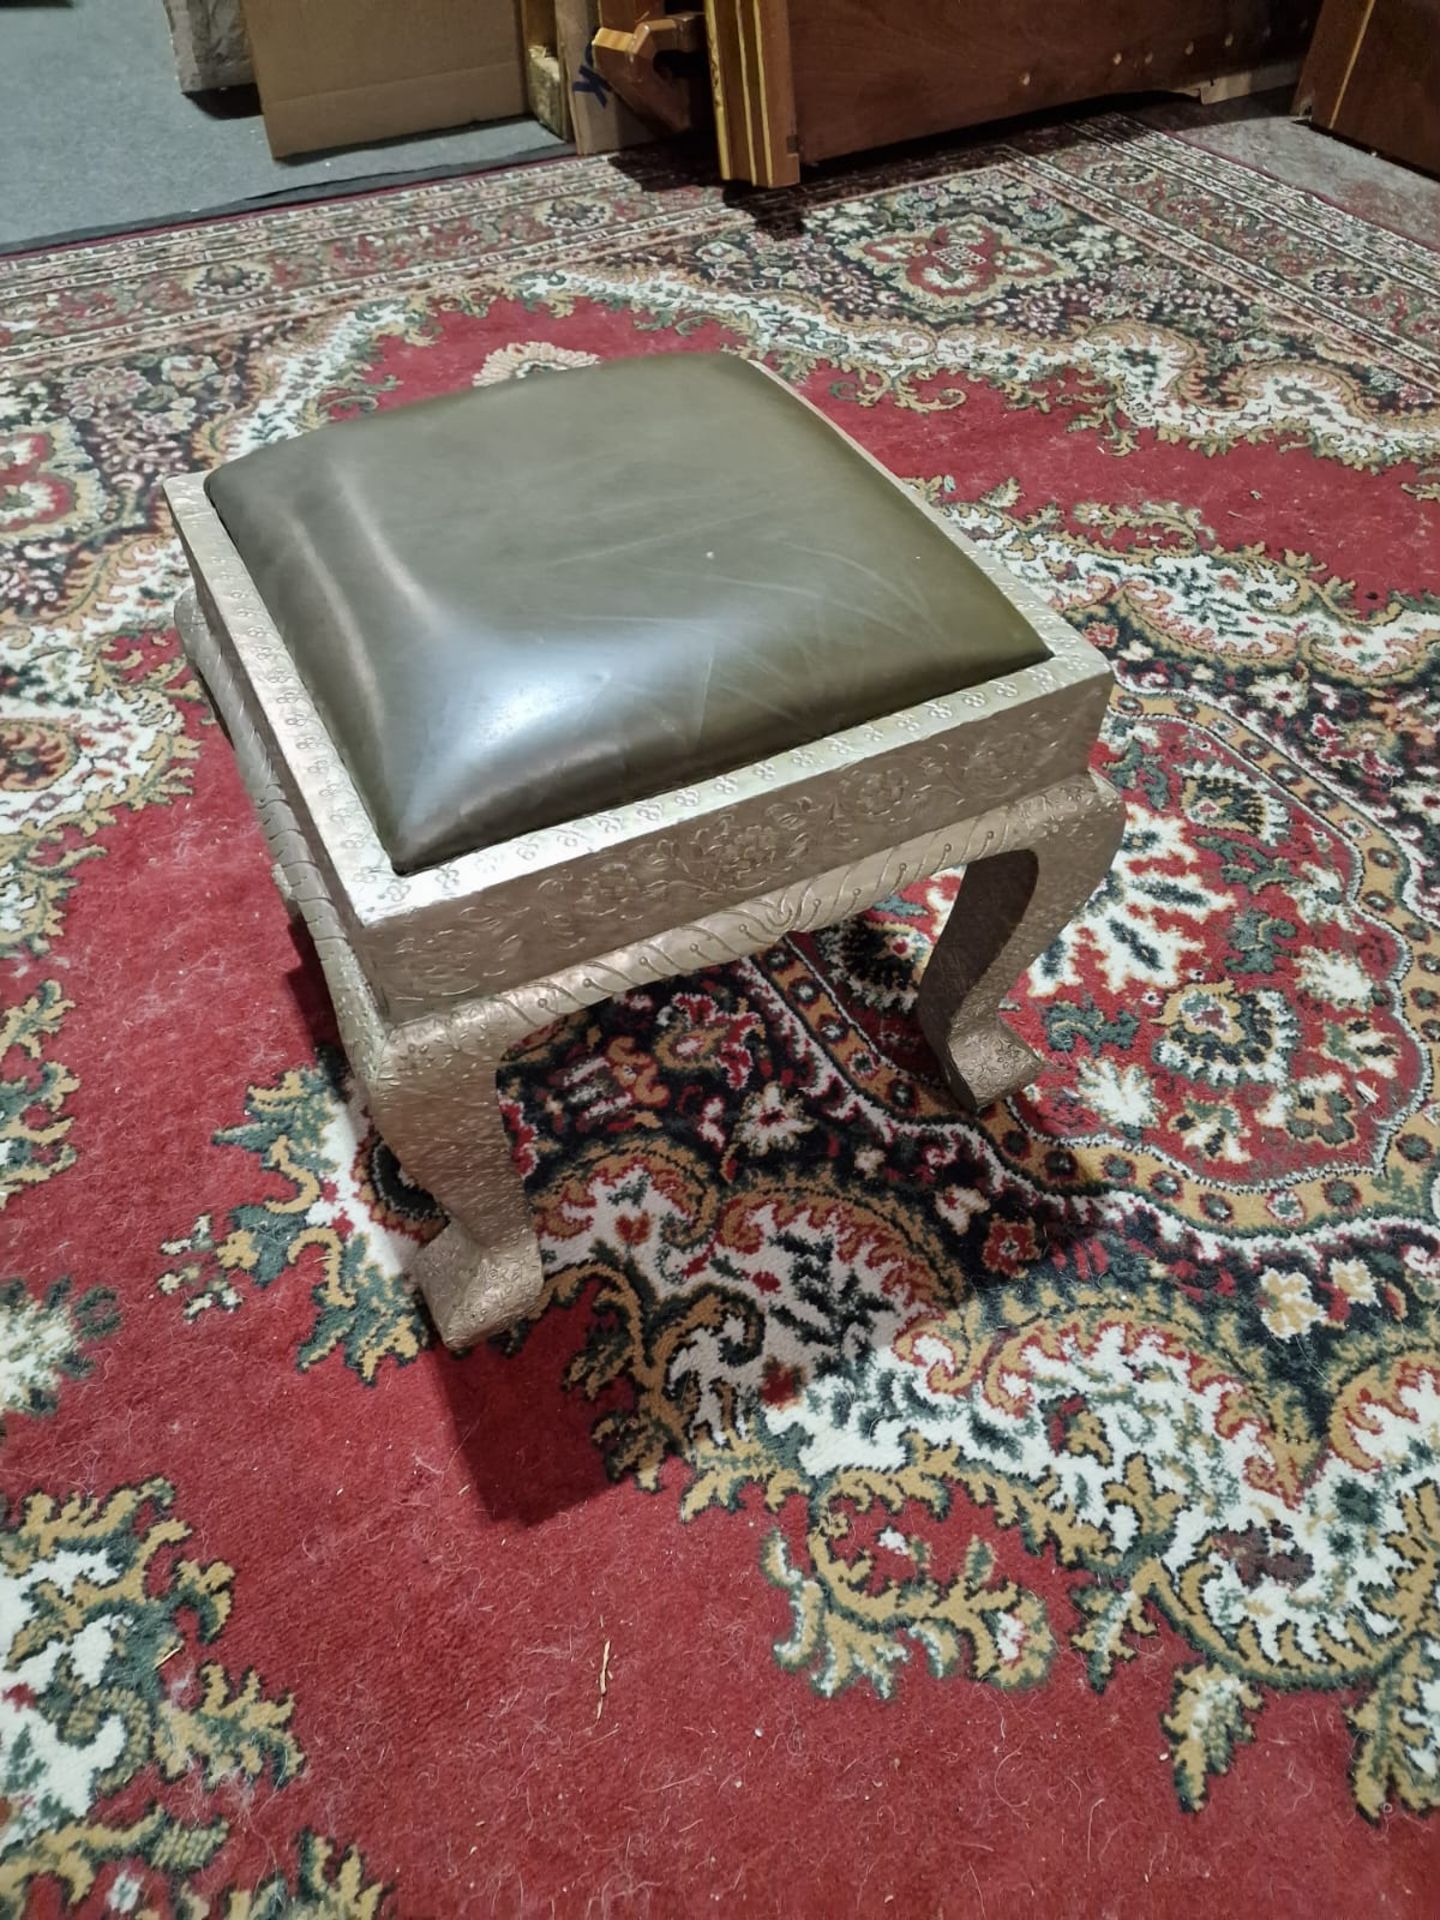 Dowry Chair And Footstool A Striking Vintage Anglo-Indian Silvered Metal-Clad Chair, 20th Century, - Image 3 of 16